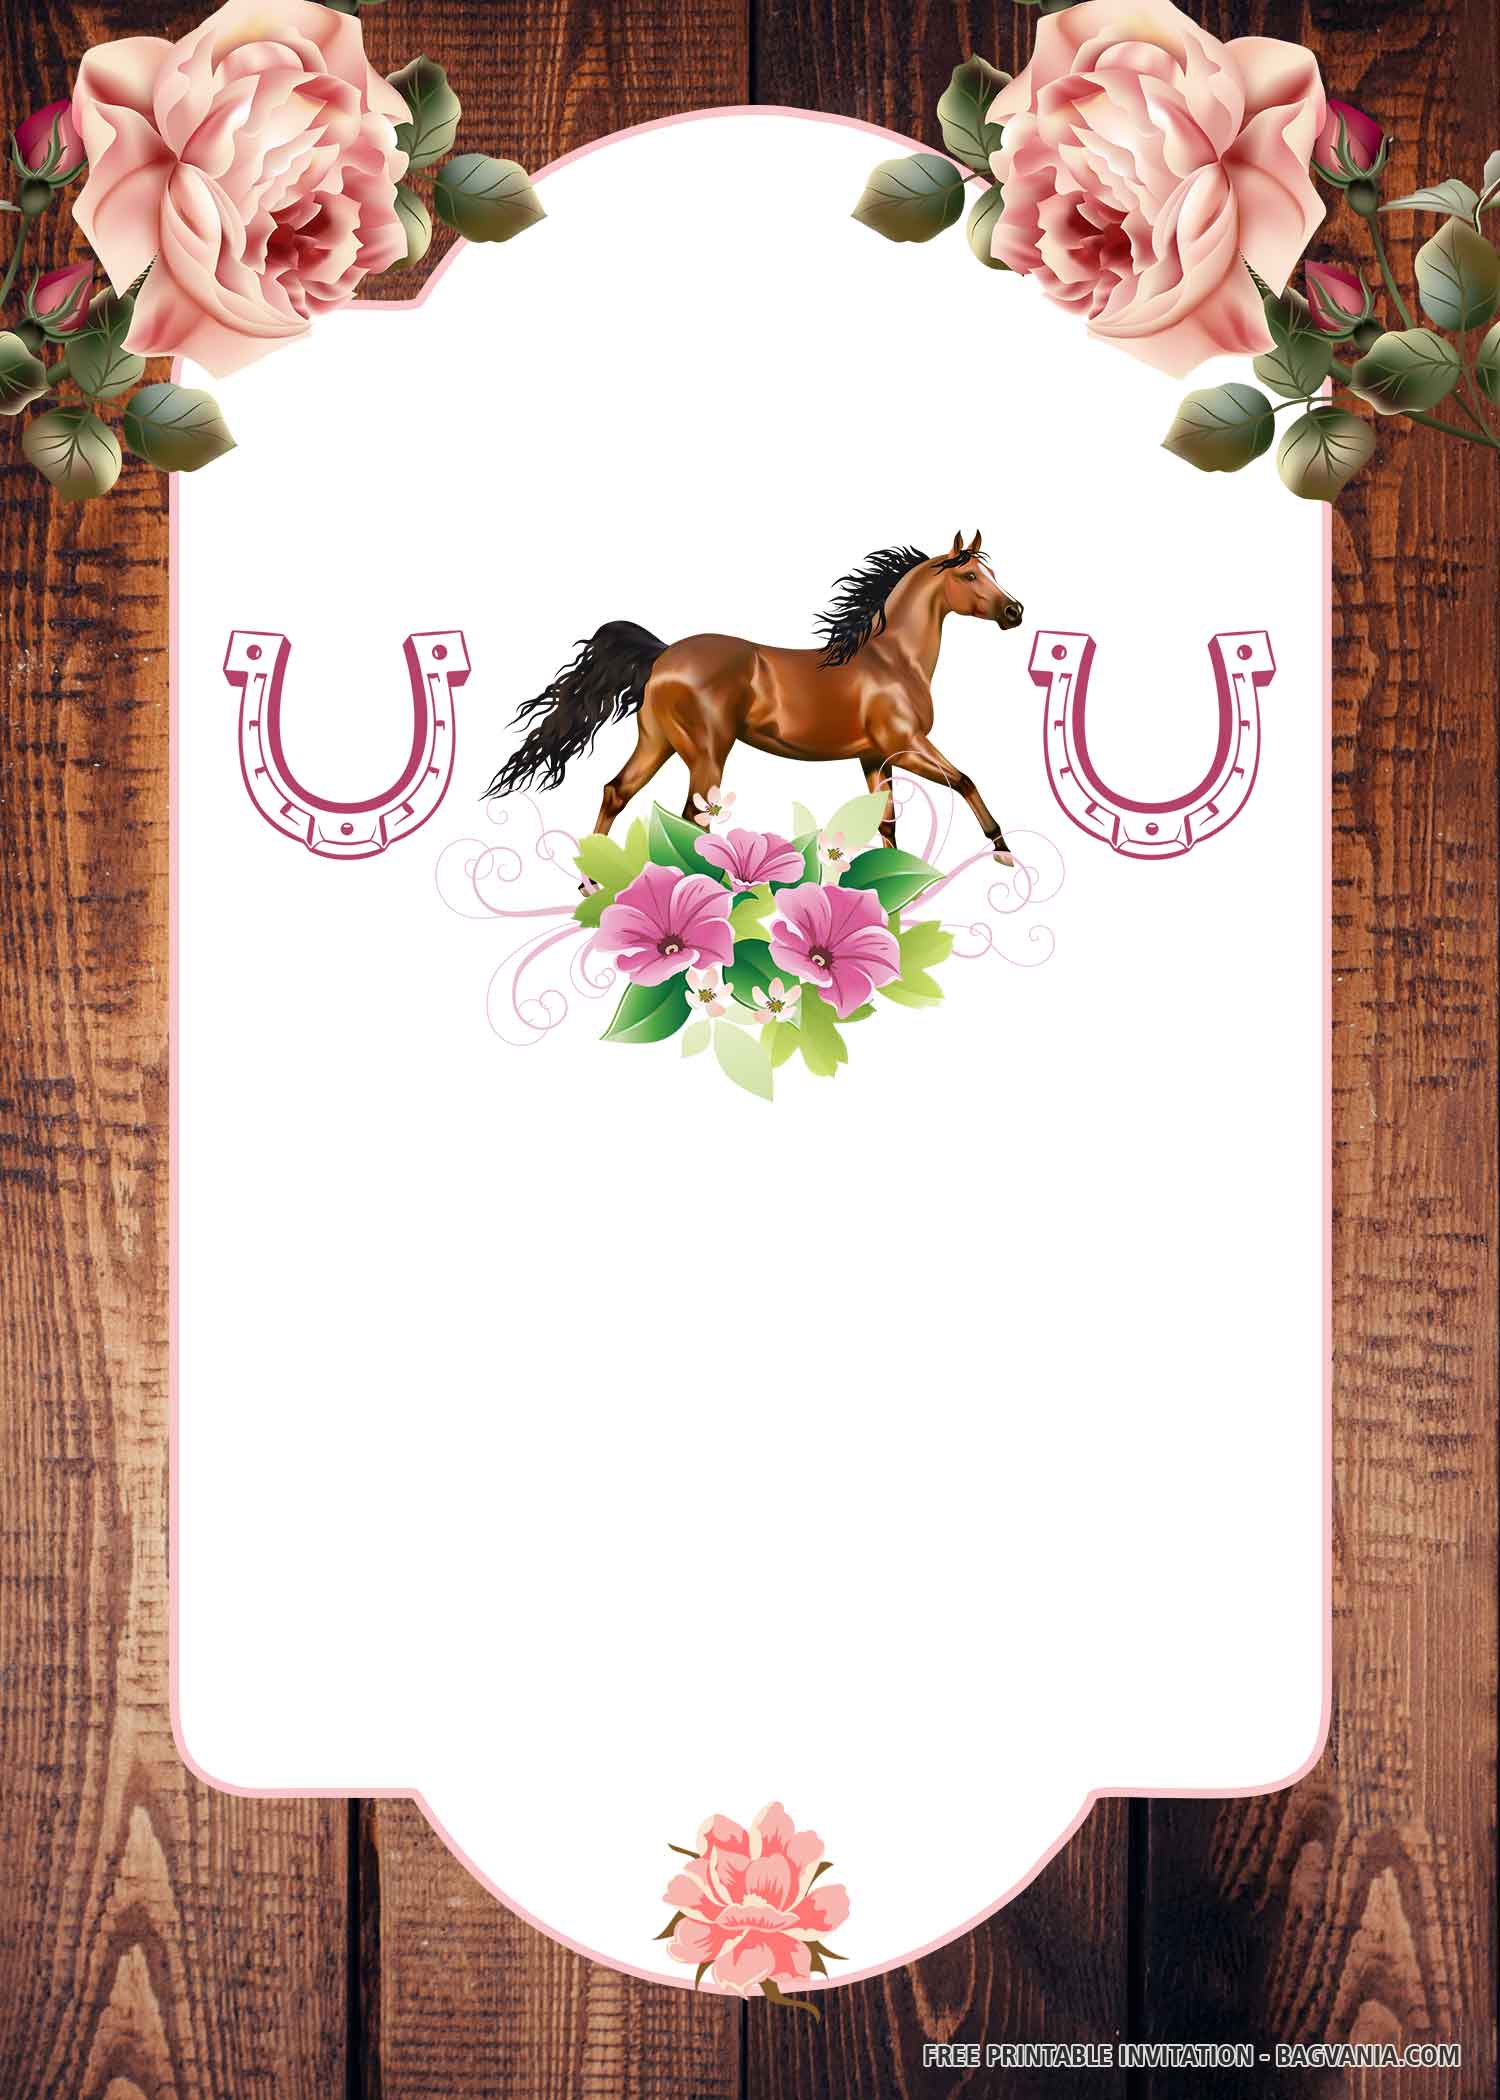 FREE Pink Horse with Horseshoes, Flowers, and Wood Background